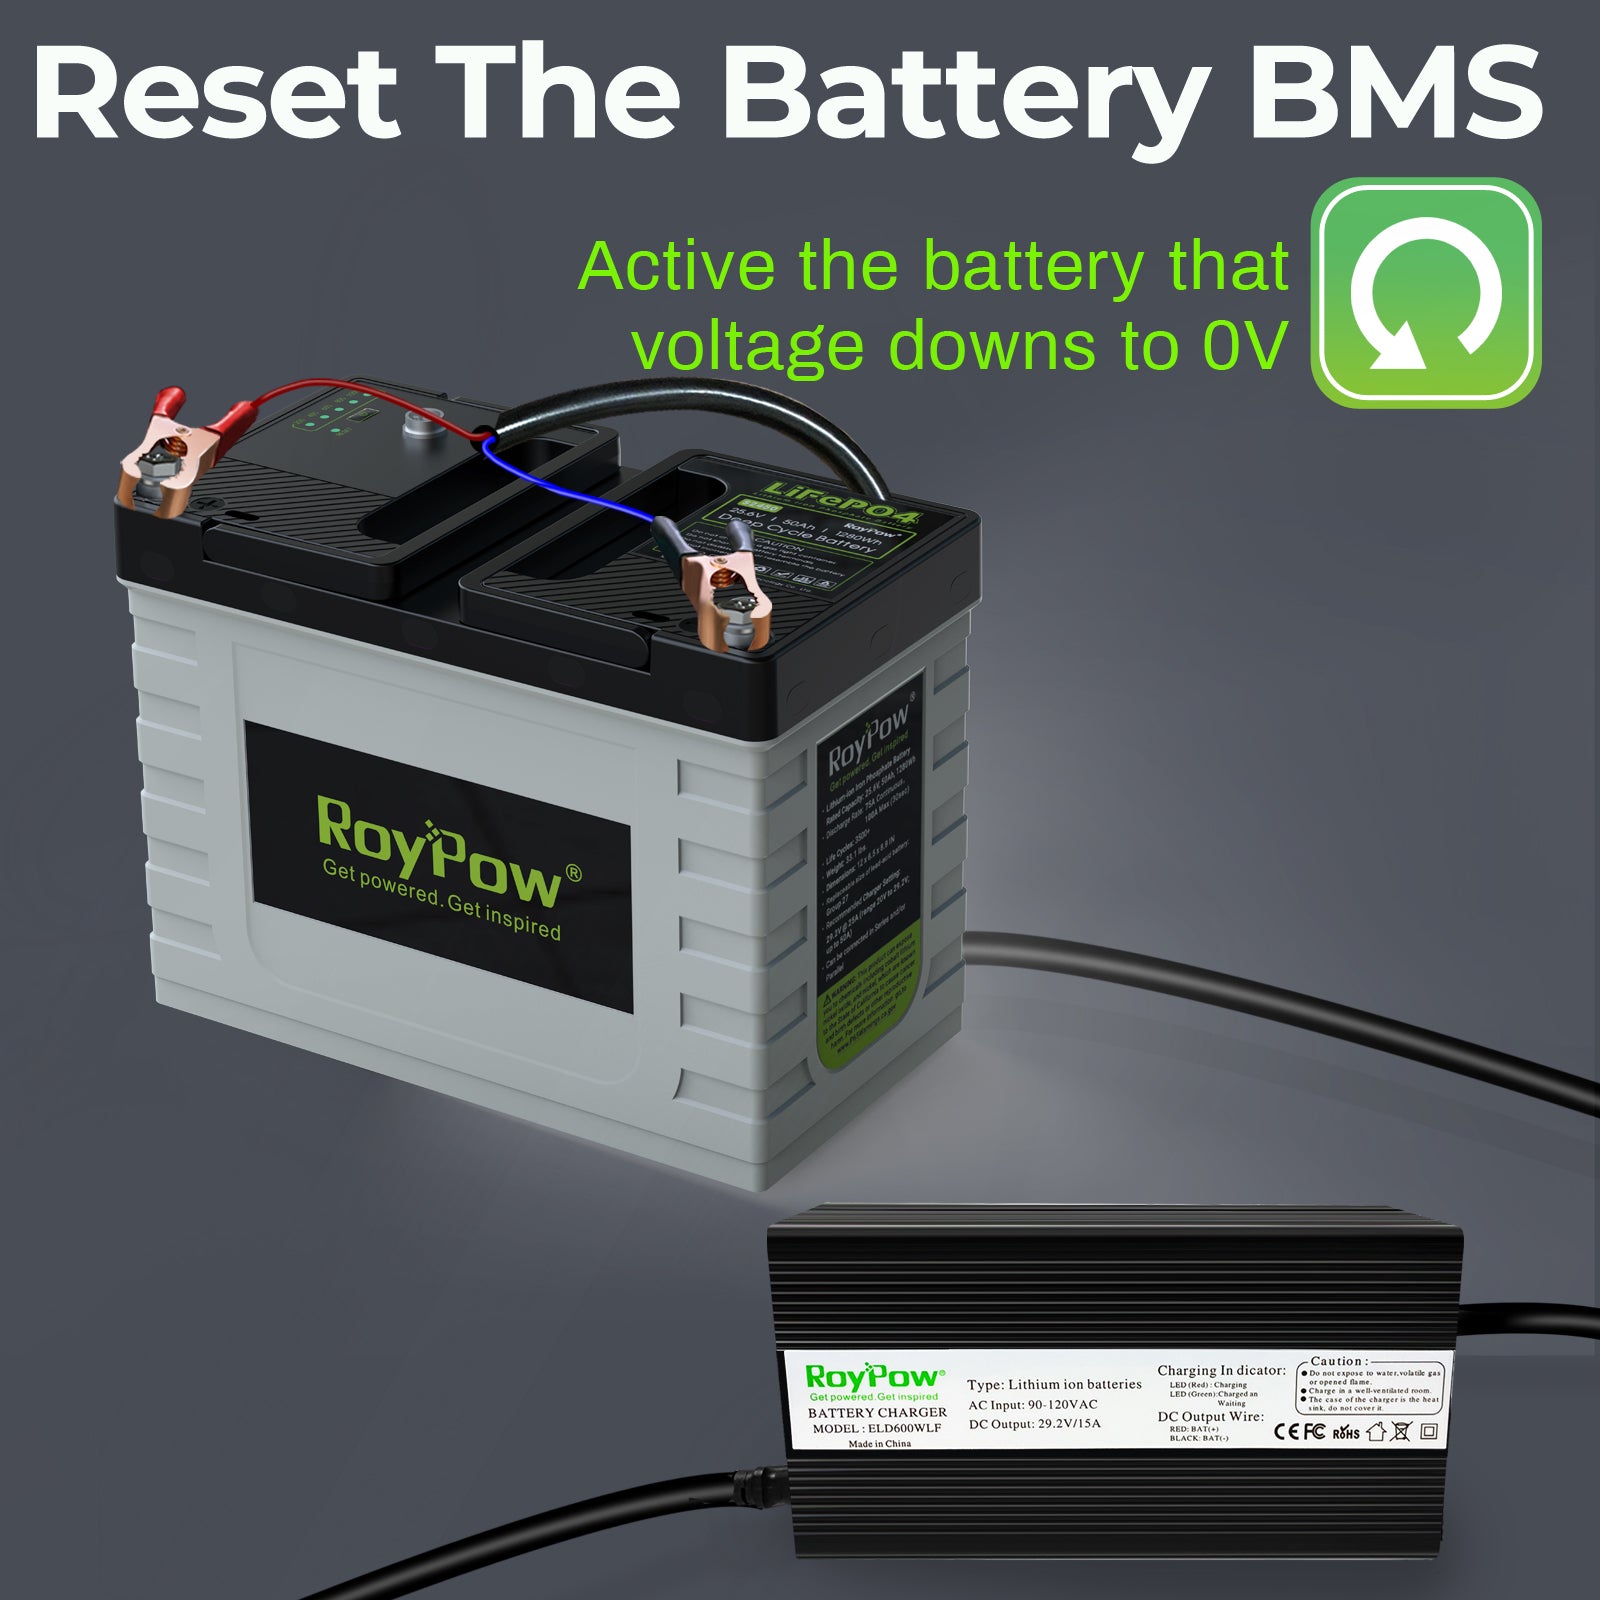 RoyPow 29.2V-15A P085MI LiFePO4 Battery charger